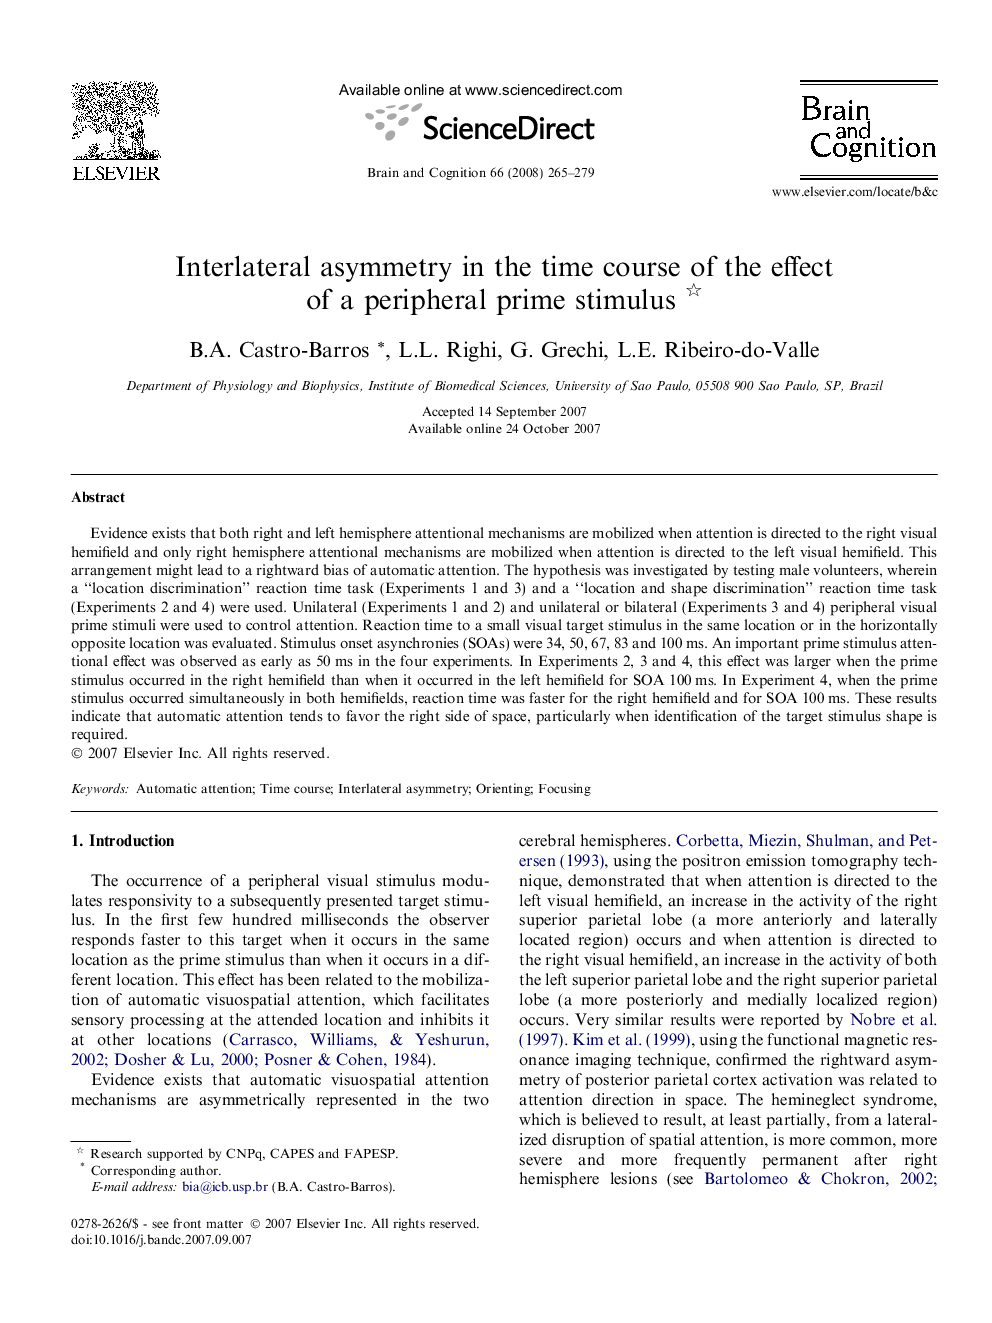 Interlateral asymmetry in the time course of the effect of a peripheral prime stimulus